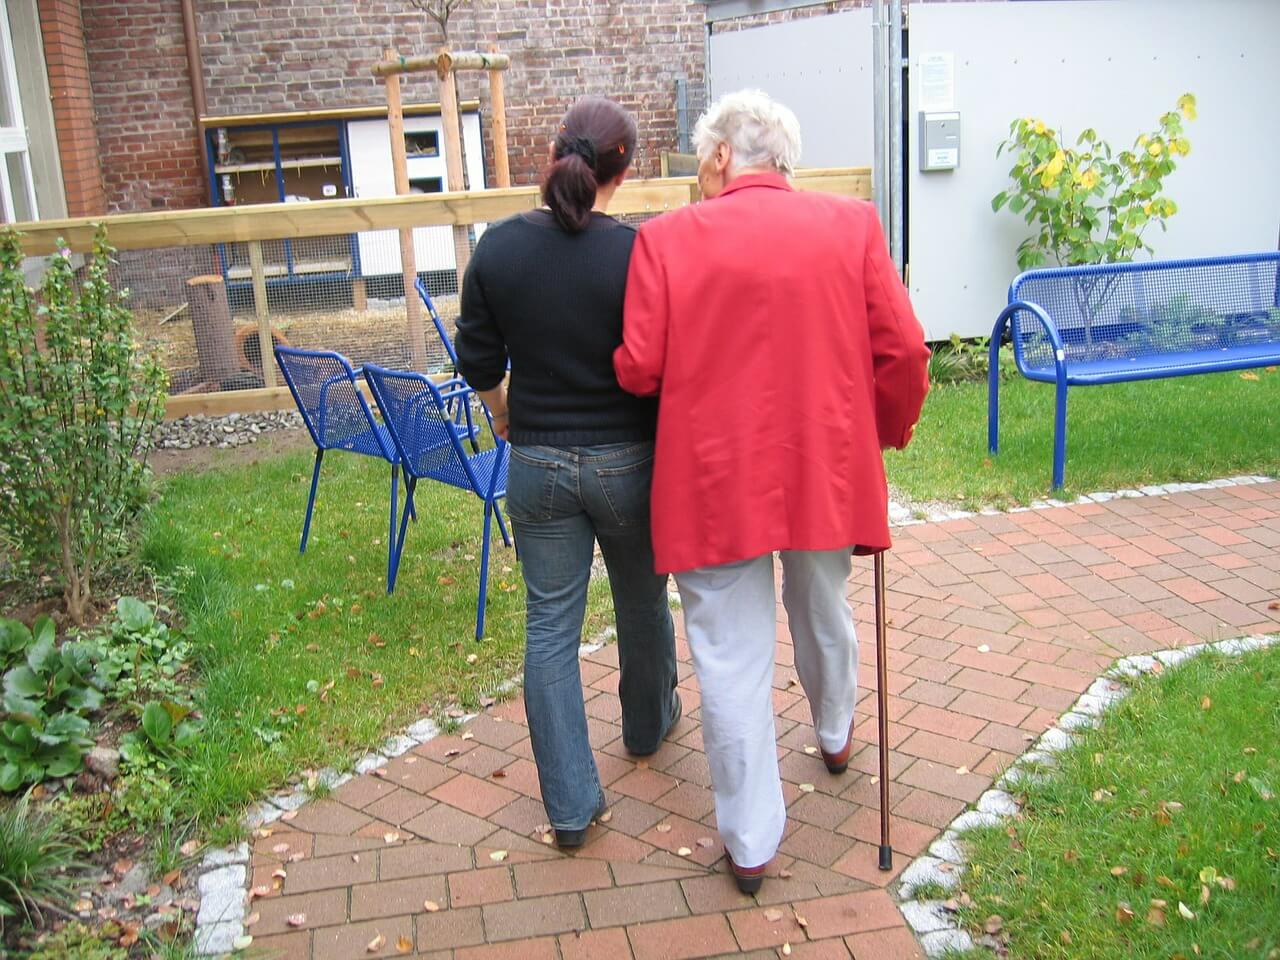 Caregiver and elderly person